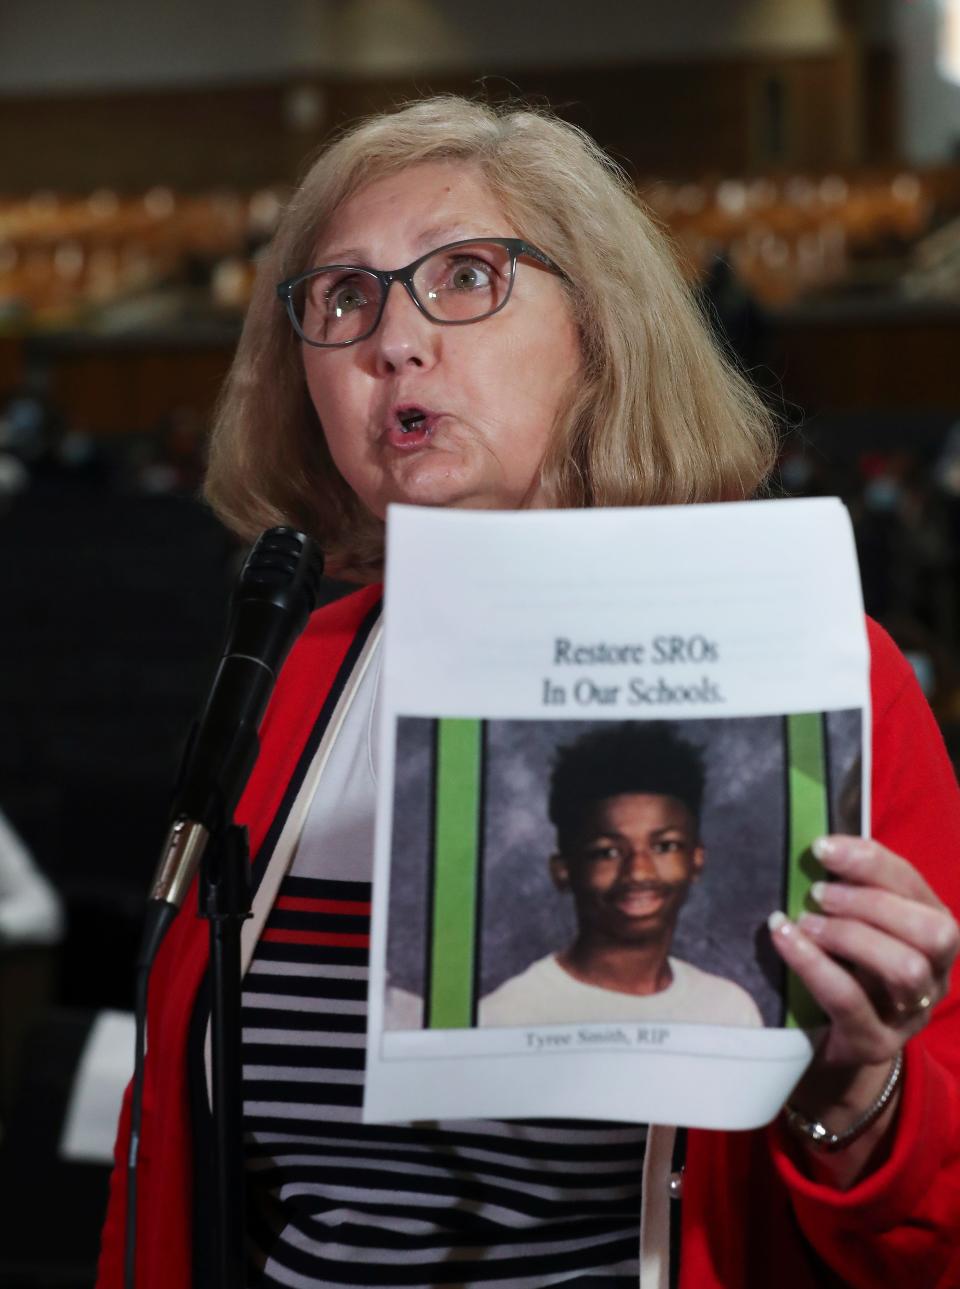 Eileen Serke chastised the JCPS Board of Education for using security during a school board meeting at Central High School in Louisville, Ky. on Oct. 5, 2021. She held an image of Eastern High School student Tyree Smith who was killed recently at a bus stop as she advocated that school resource officers be returned to schools.